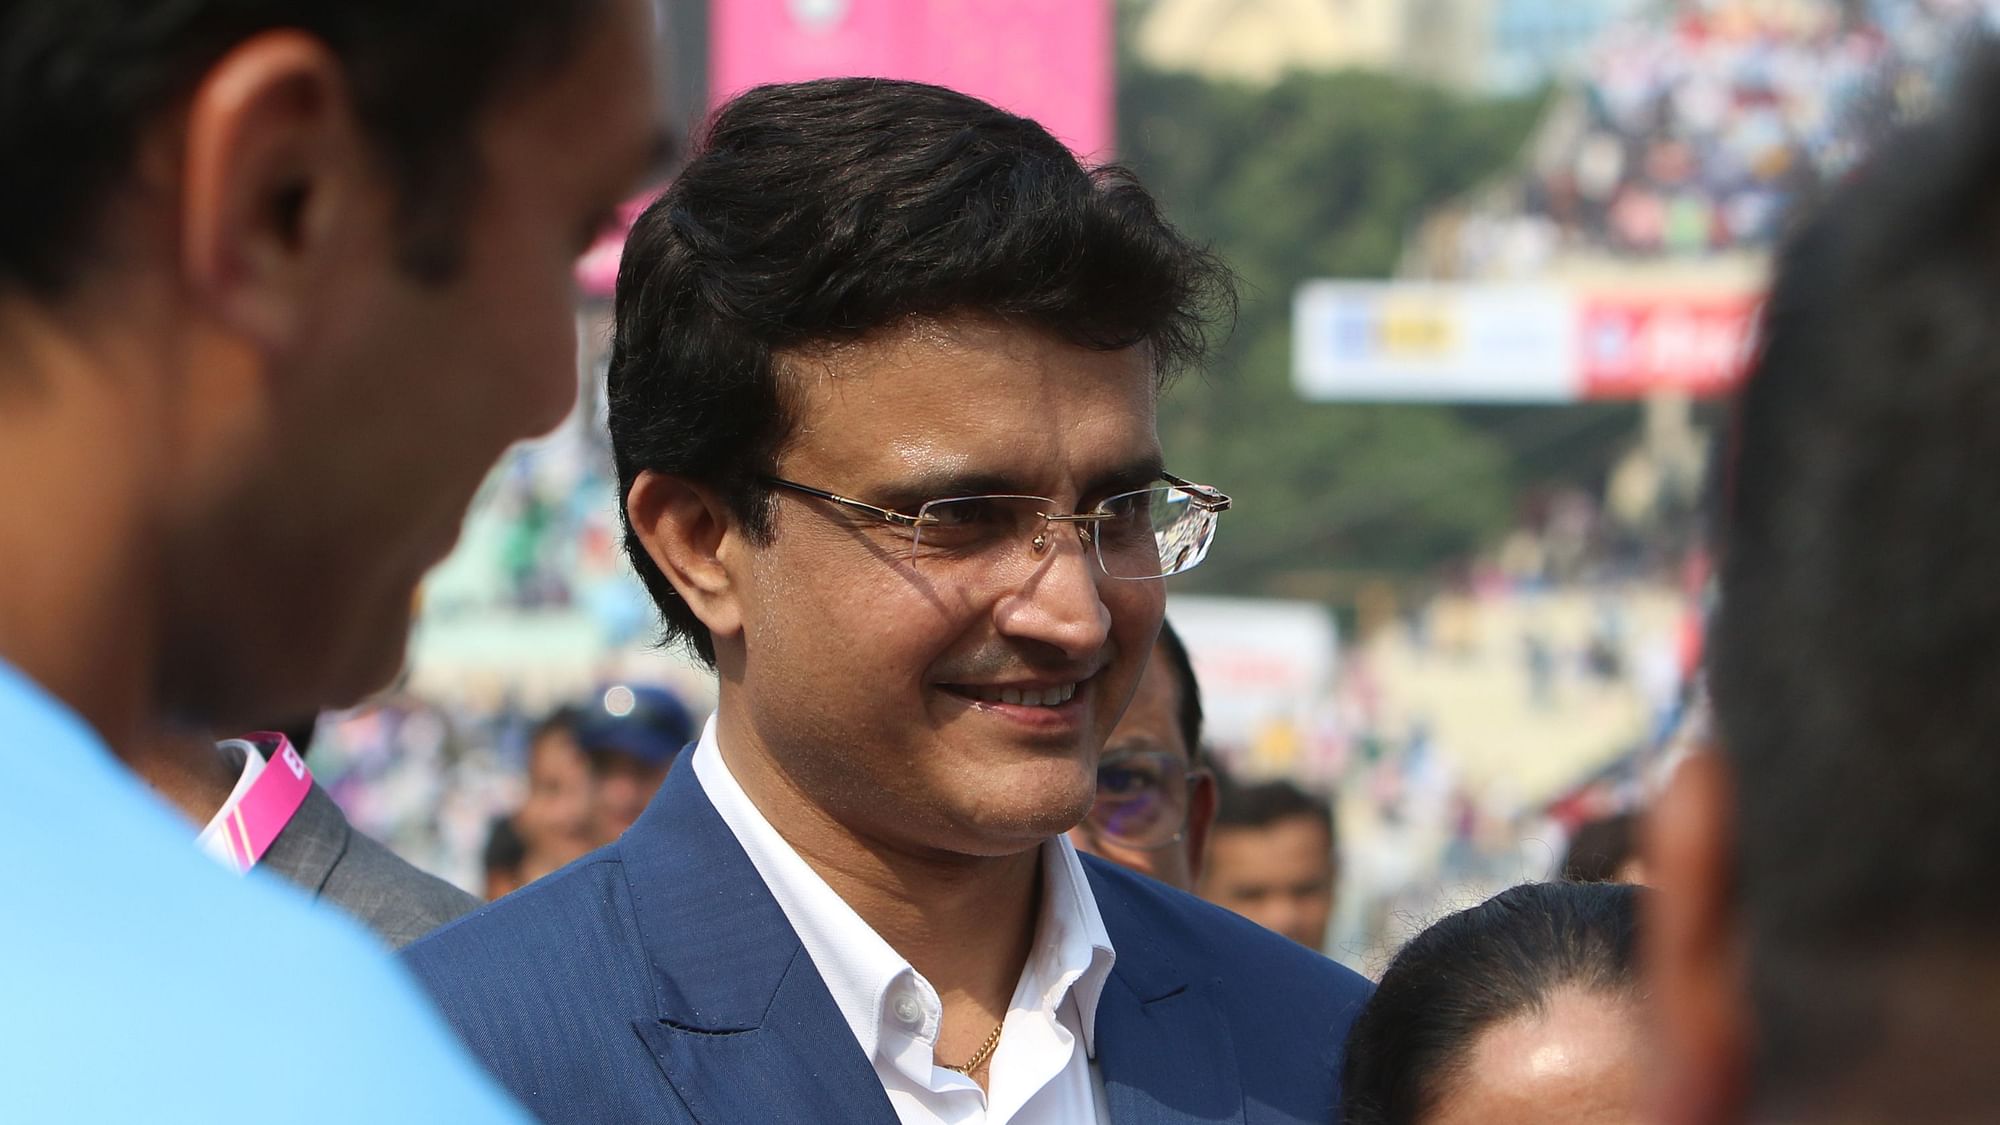 BCCI President Sourav Ganguly has lauded India’s fearless batting in the final T20I against the West Indies.